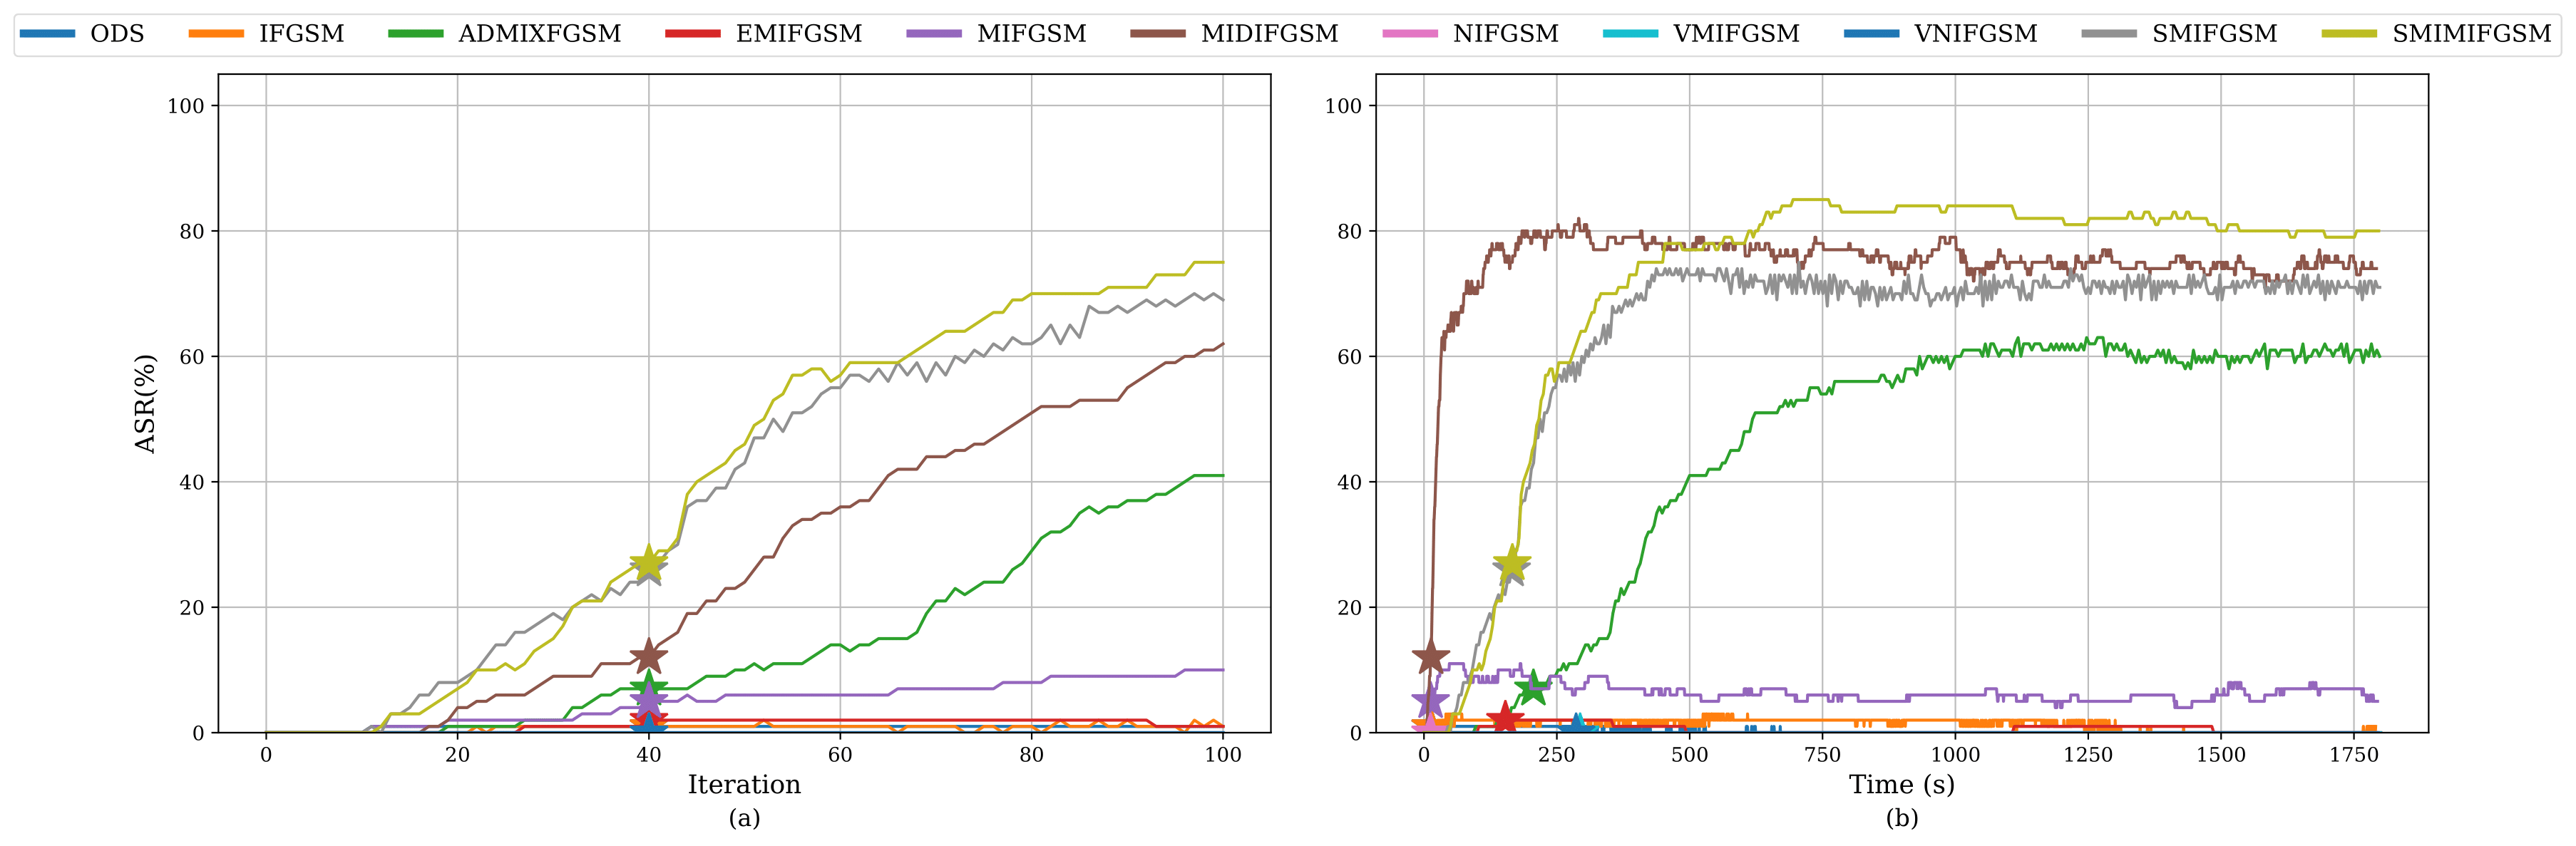 ASR for various attacks, compared based on iterations (left) and time (right)